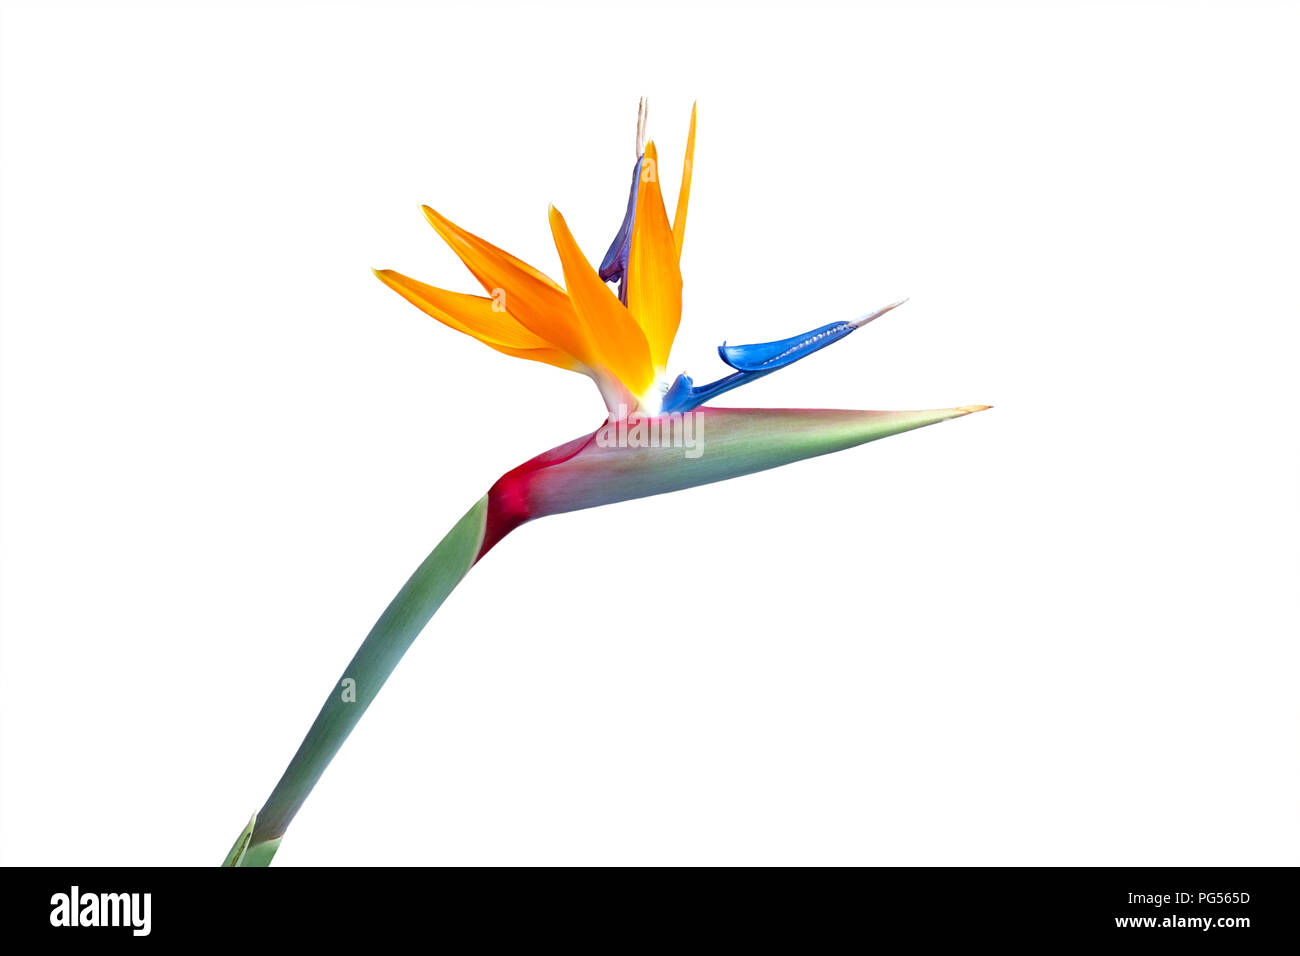 Bird of Paradise flower isolated on a white background Banque D'Images